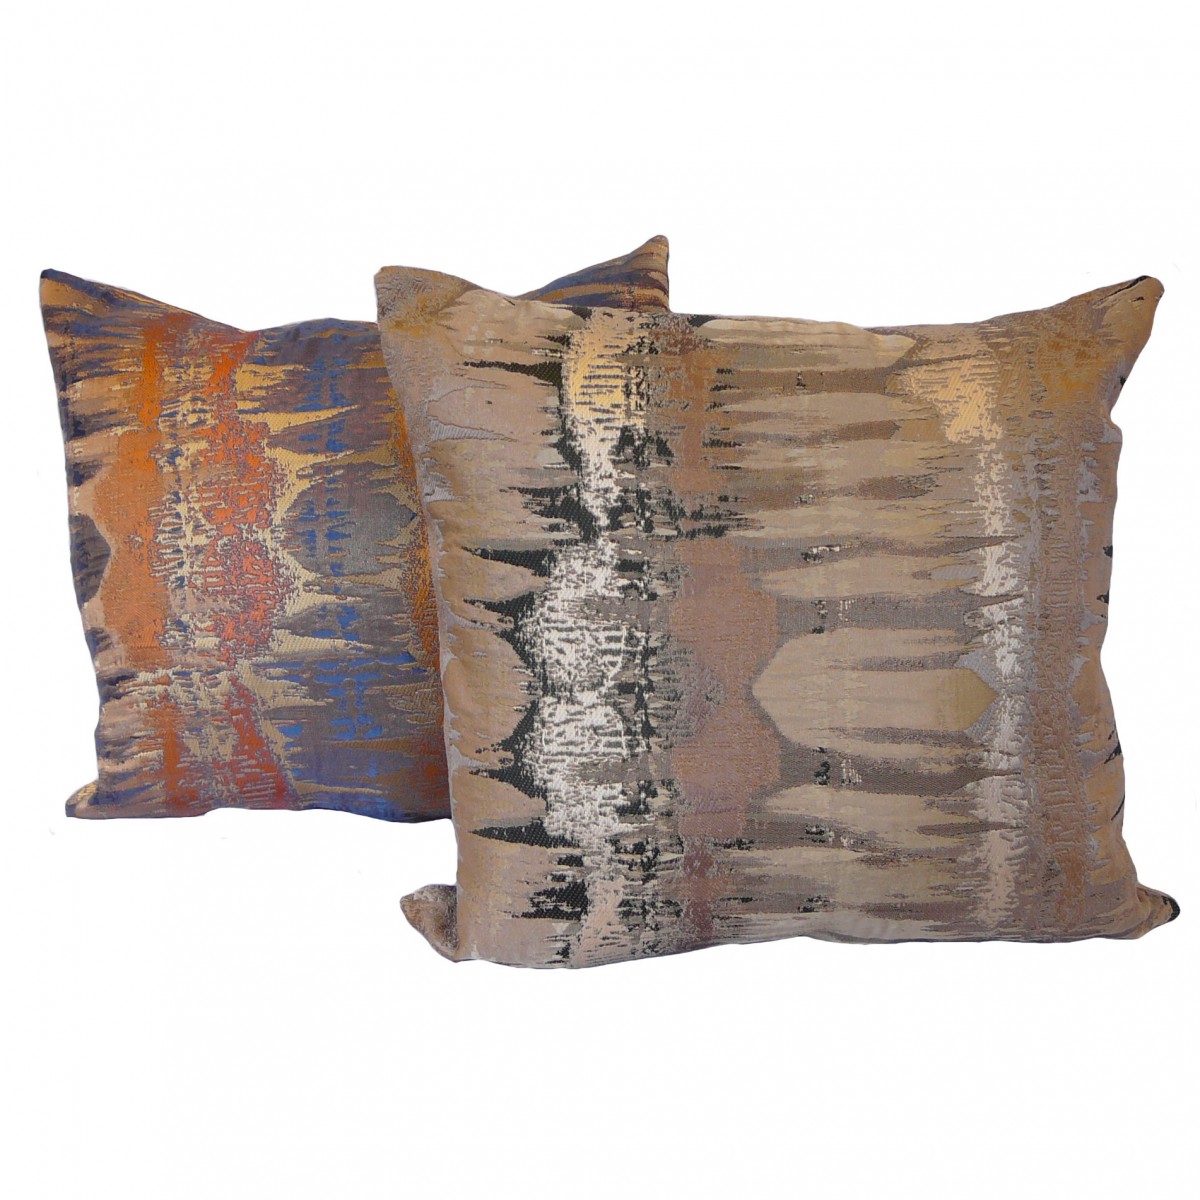 moroccan-style-cushion-covers-1200×1200